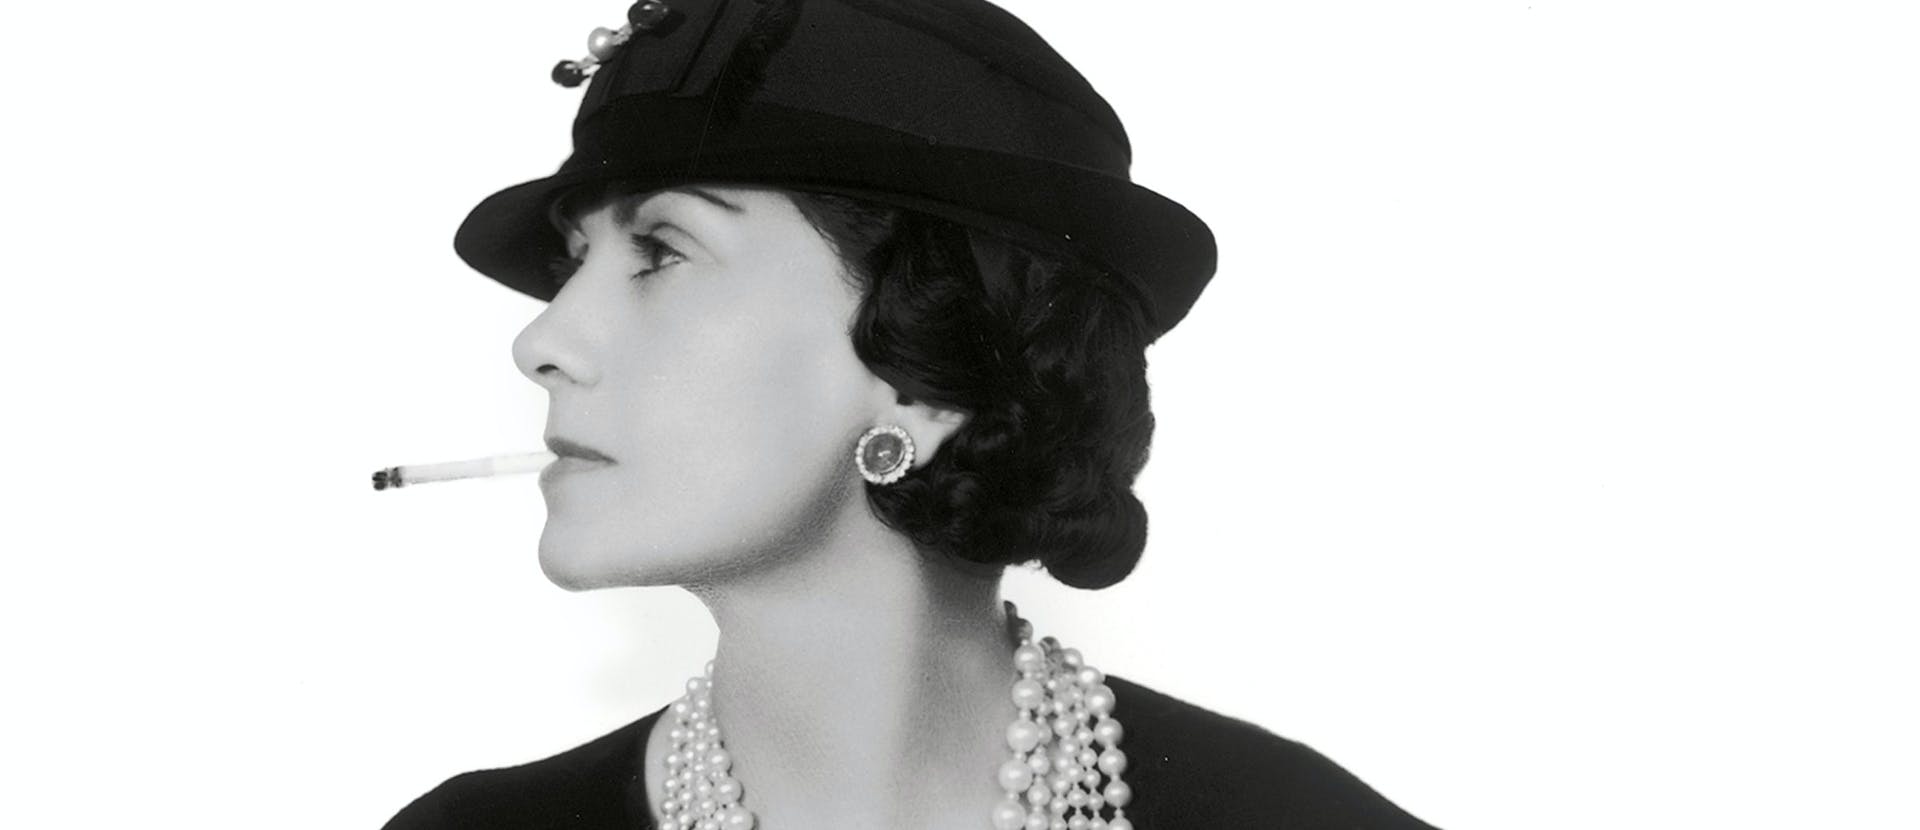 Coco Chanel's journey as a designer